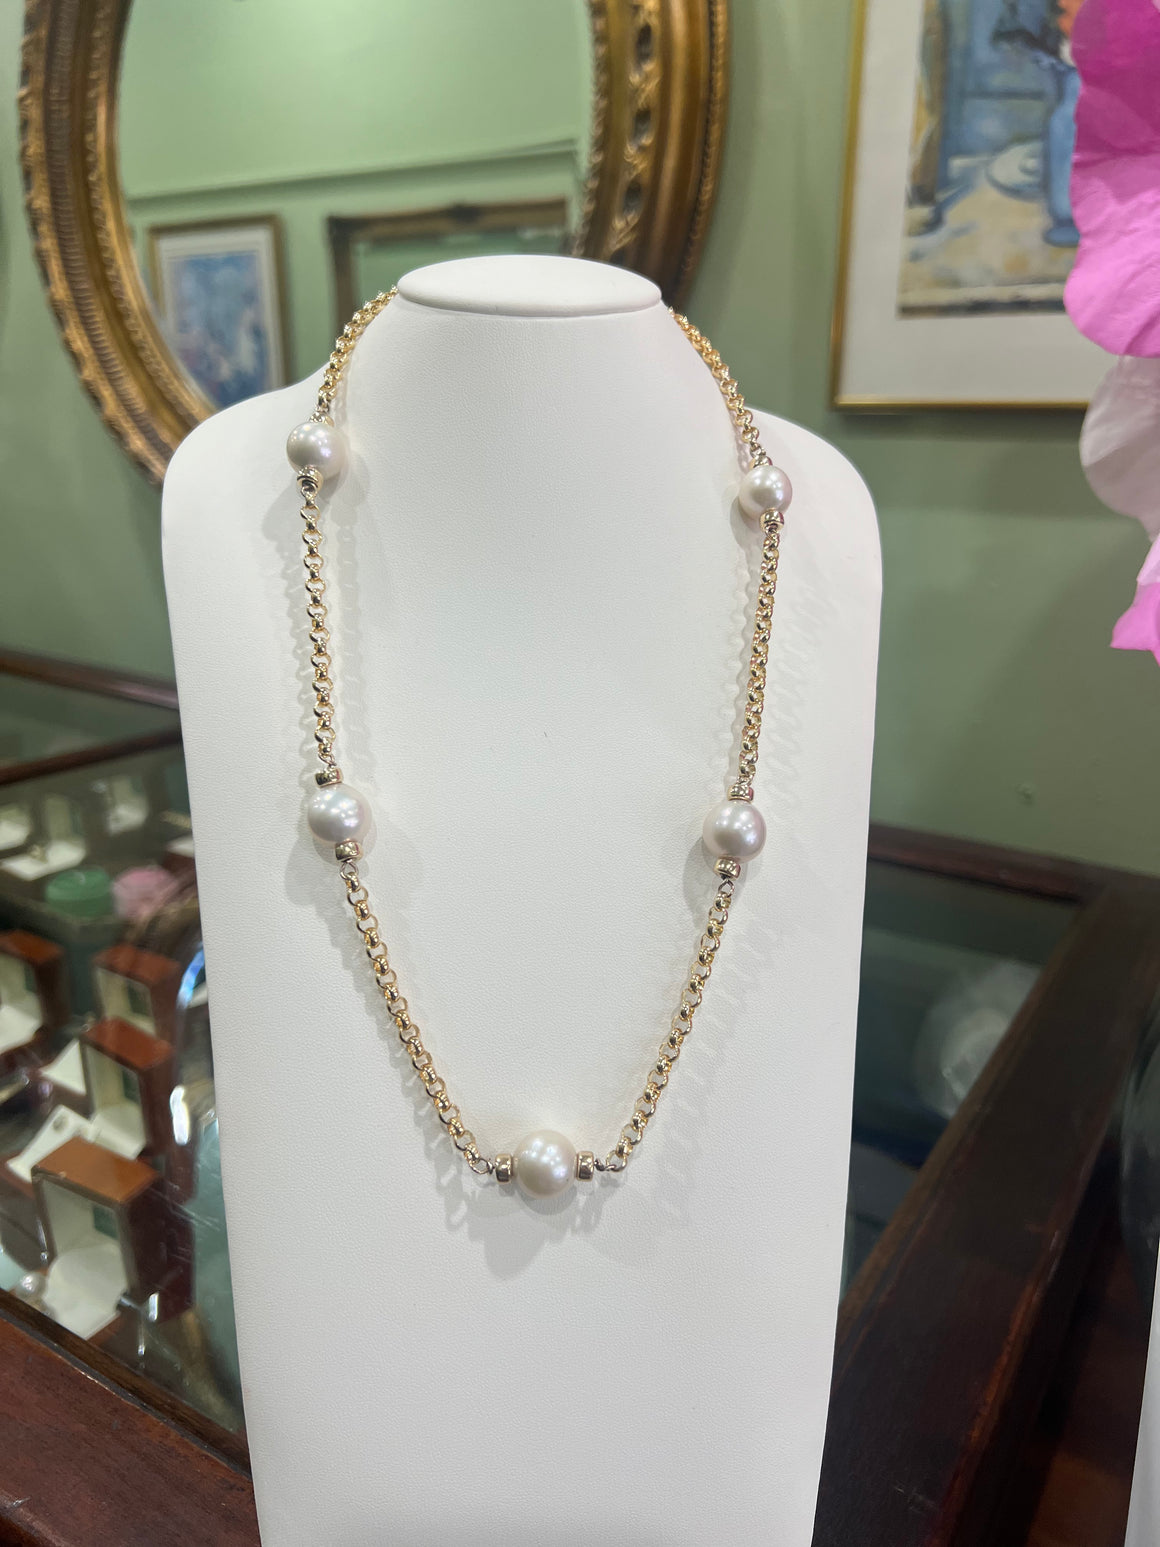 Five Pearl Necklace in 9ct yellow gold